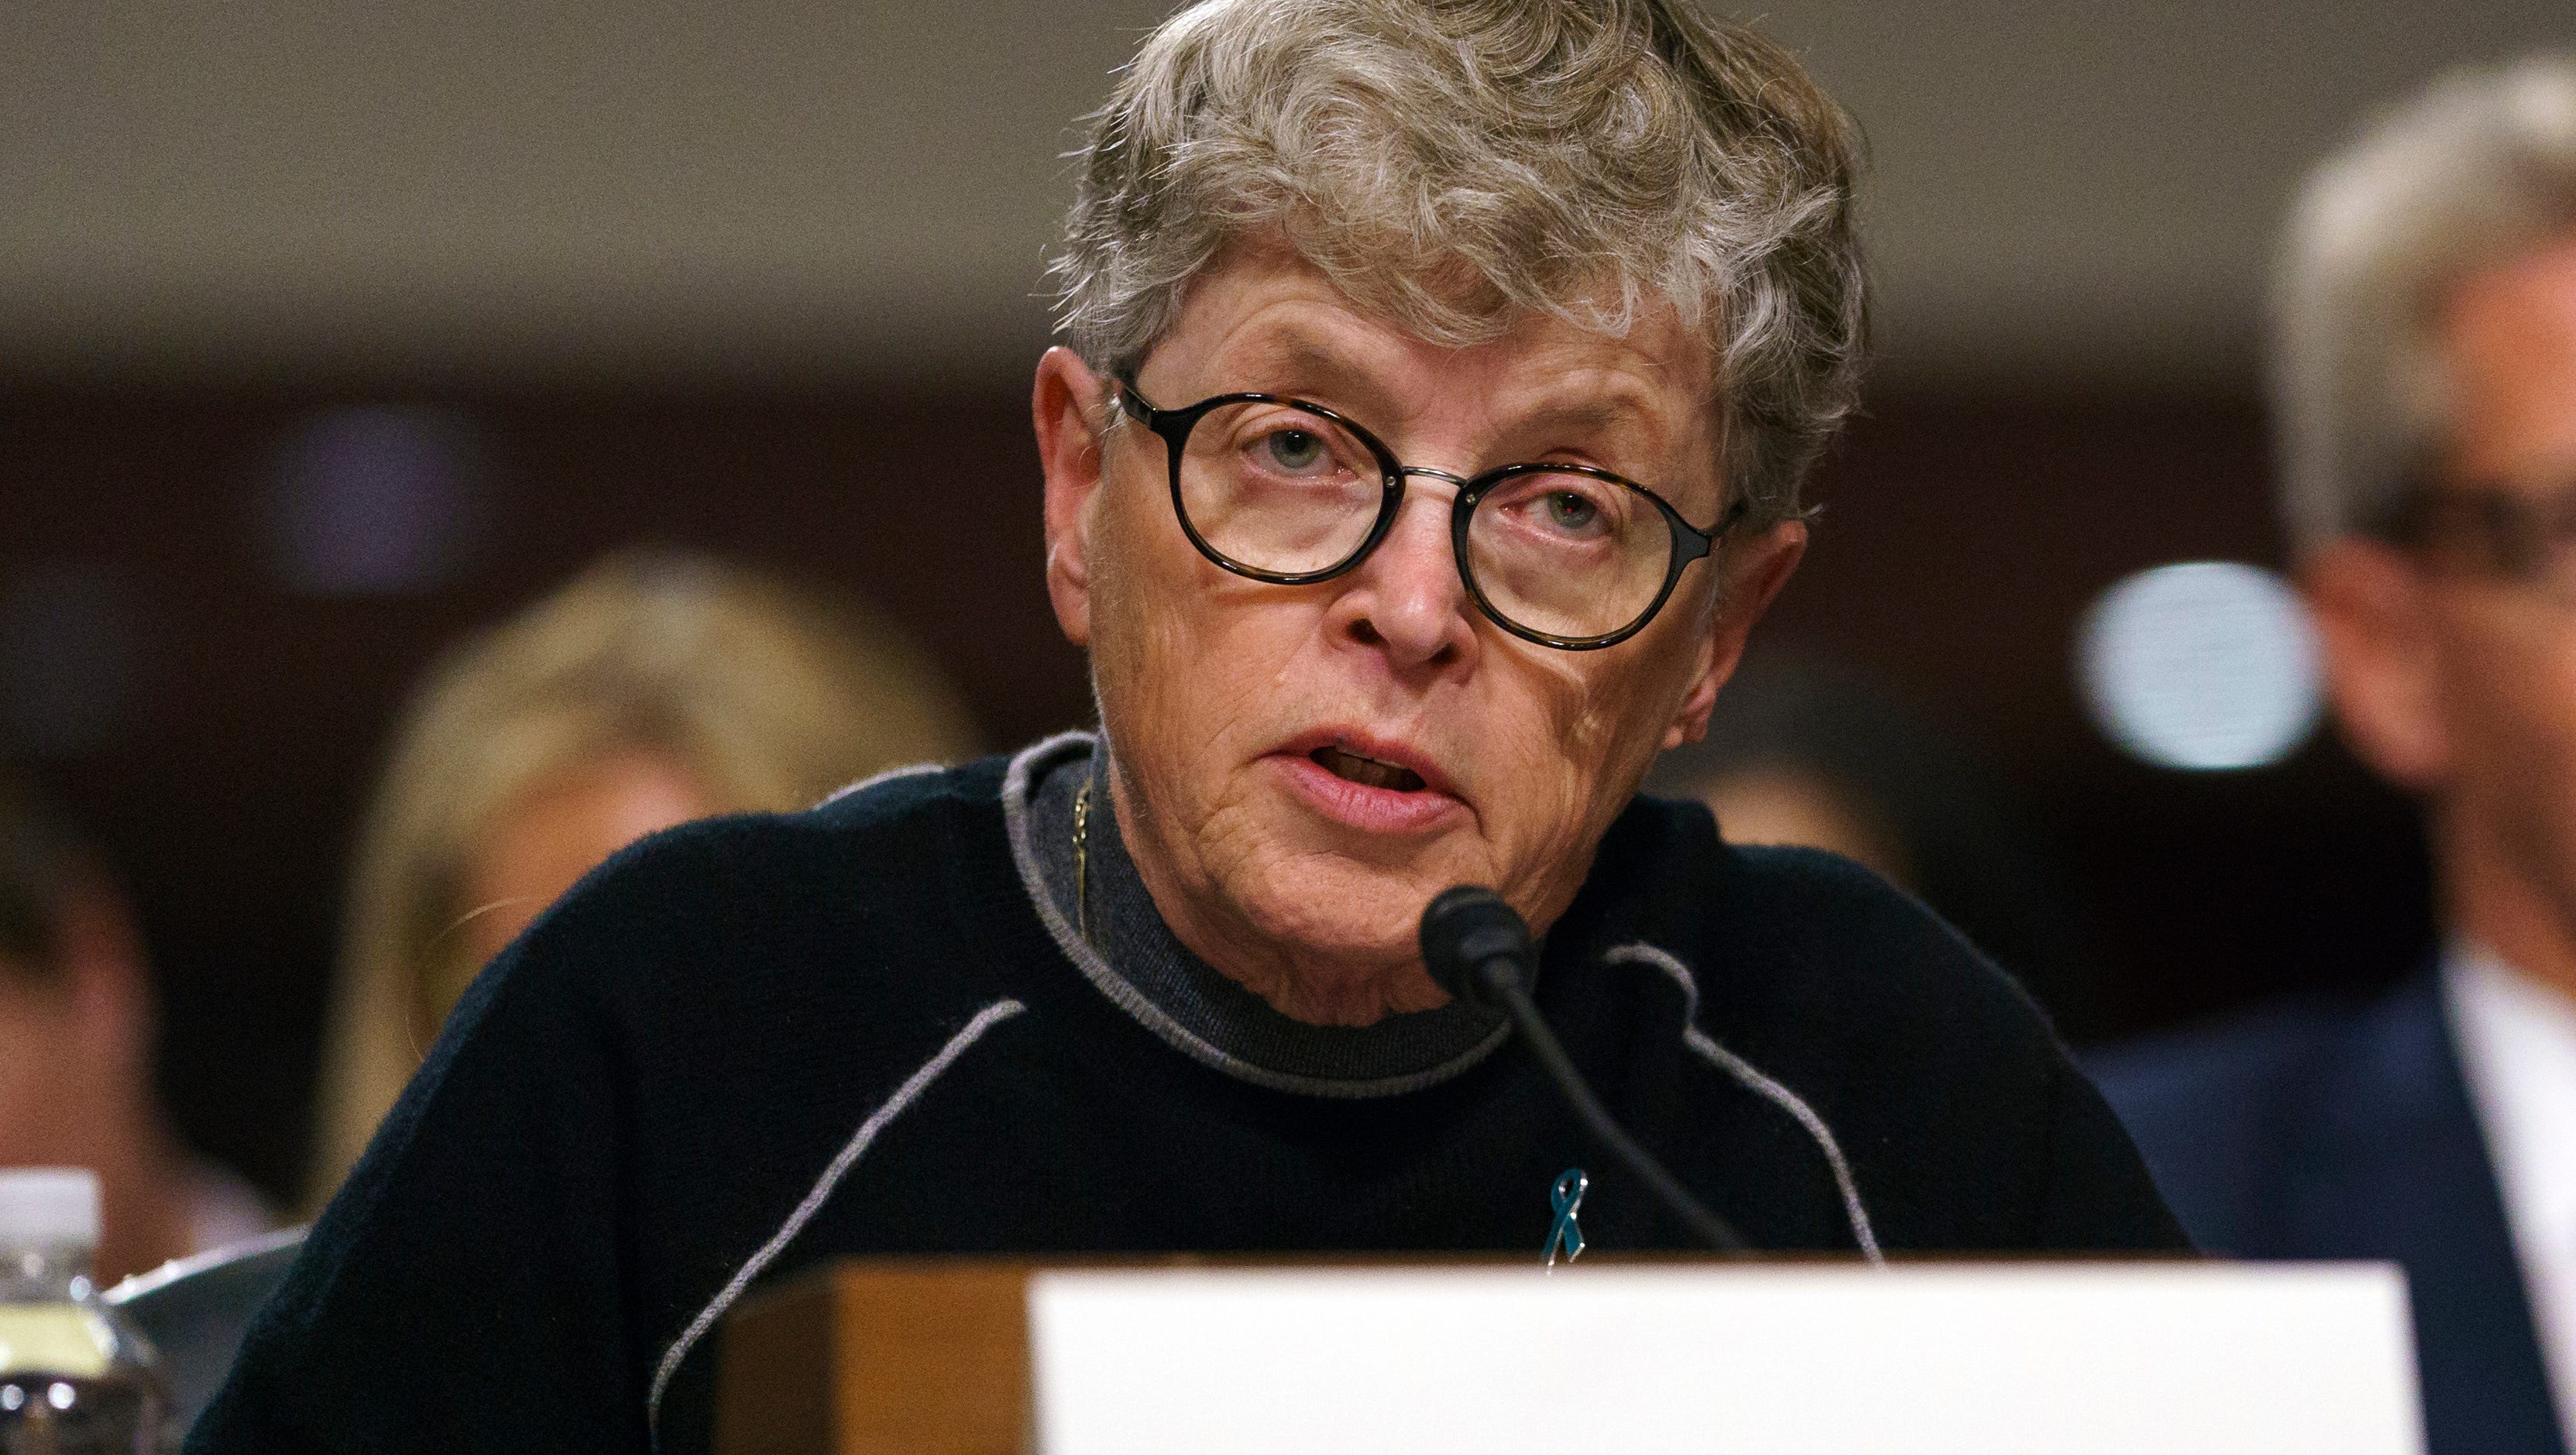 Former Michigan State University president Lou Anna Simon testifies during a Senate Subcommittee on Consumer Protection, Product Safety, Insurance, and Data Security, on Capitol Hill in Washington on Tuesday.